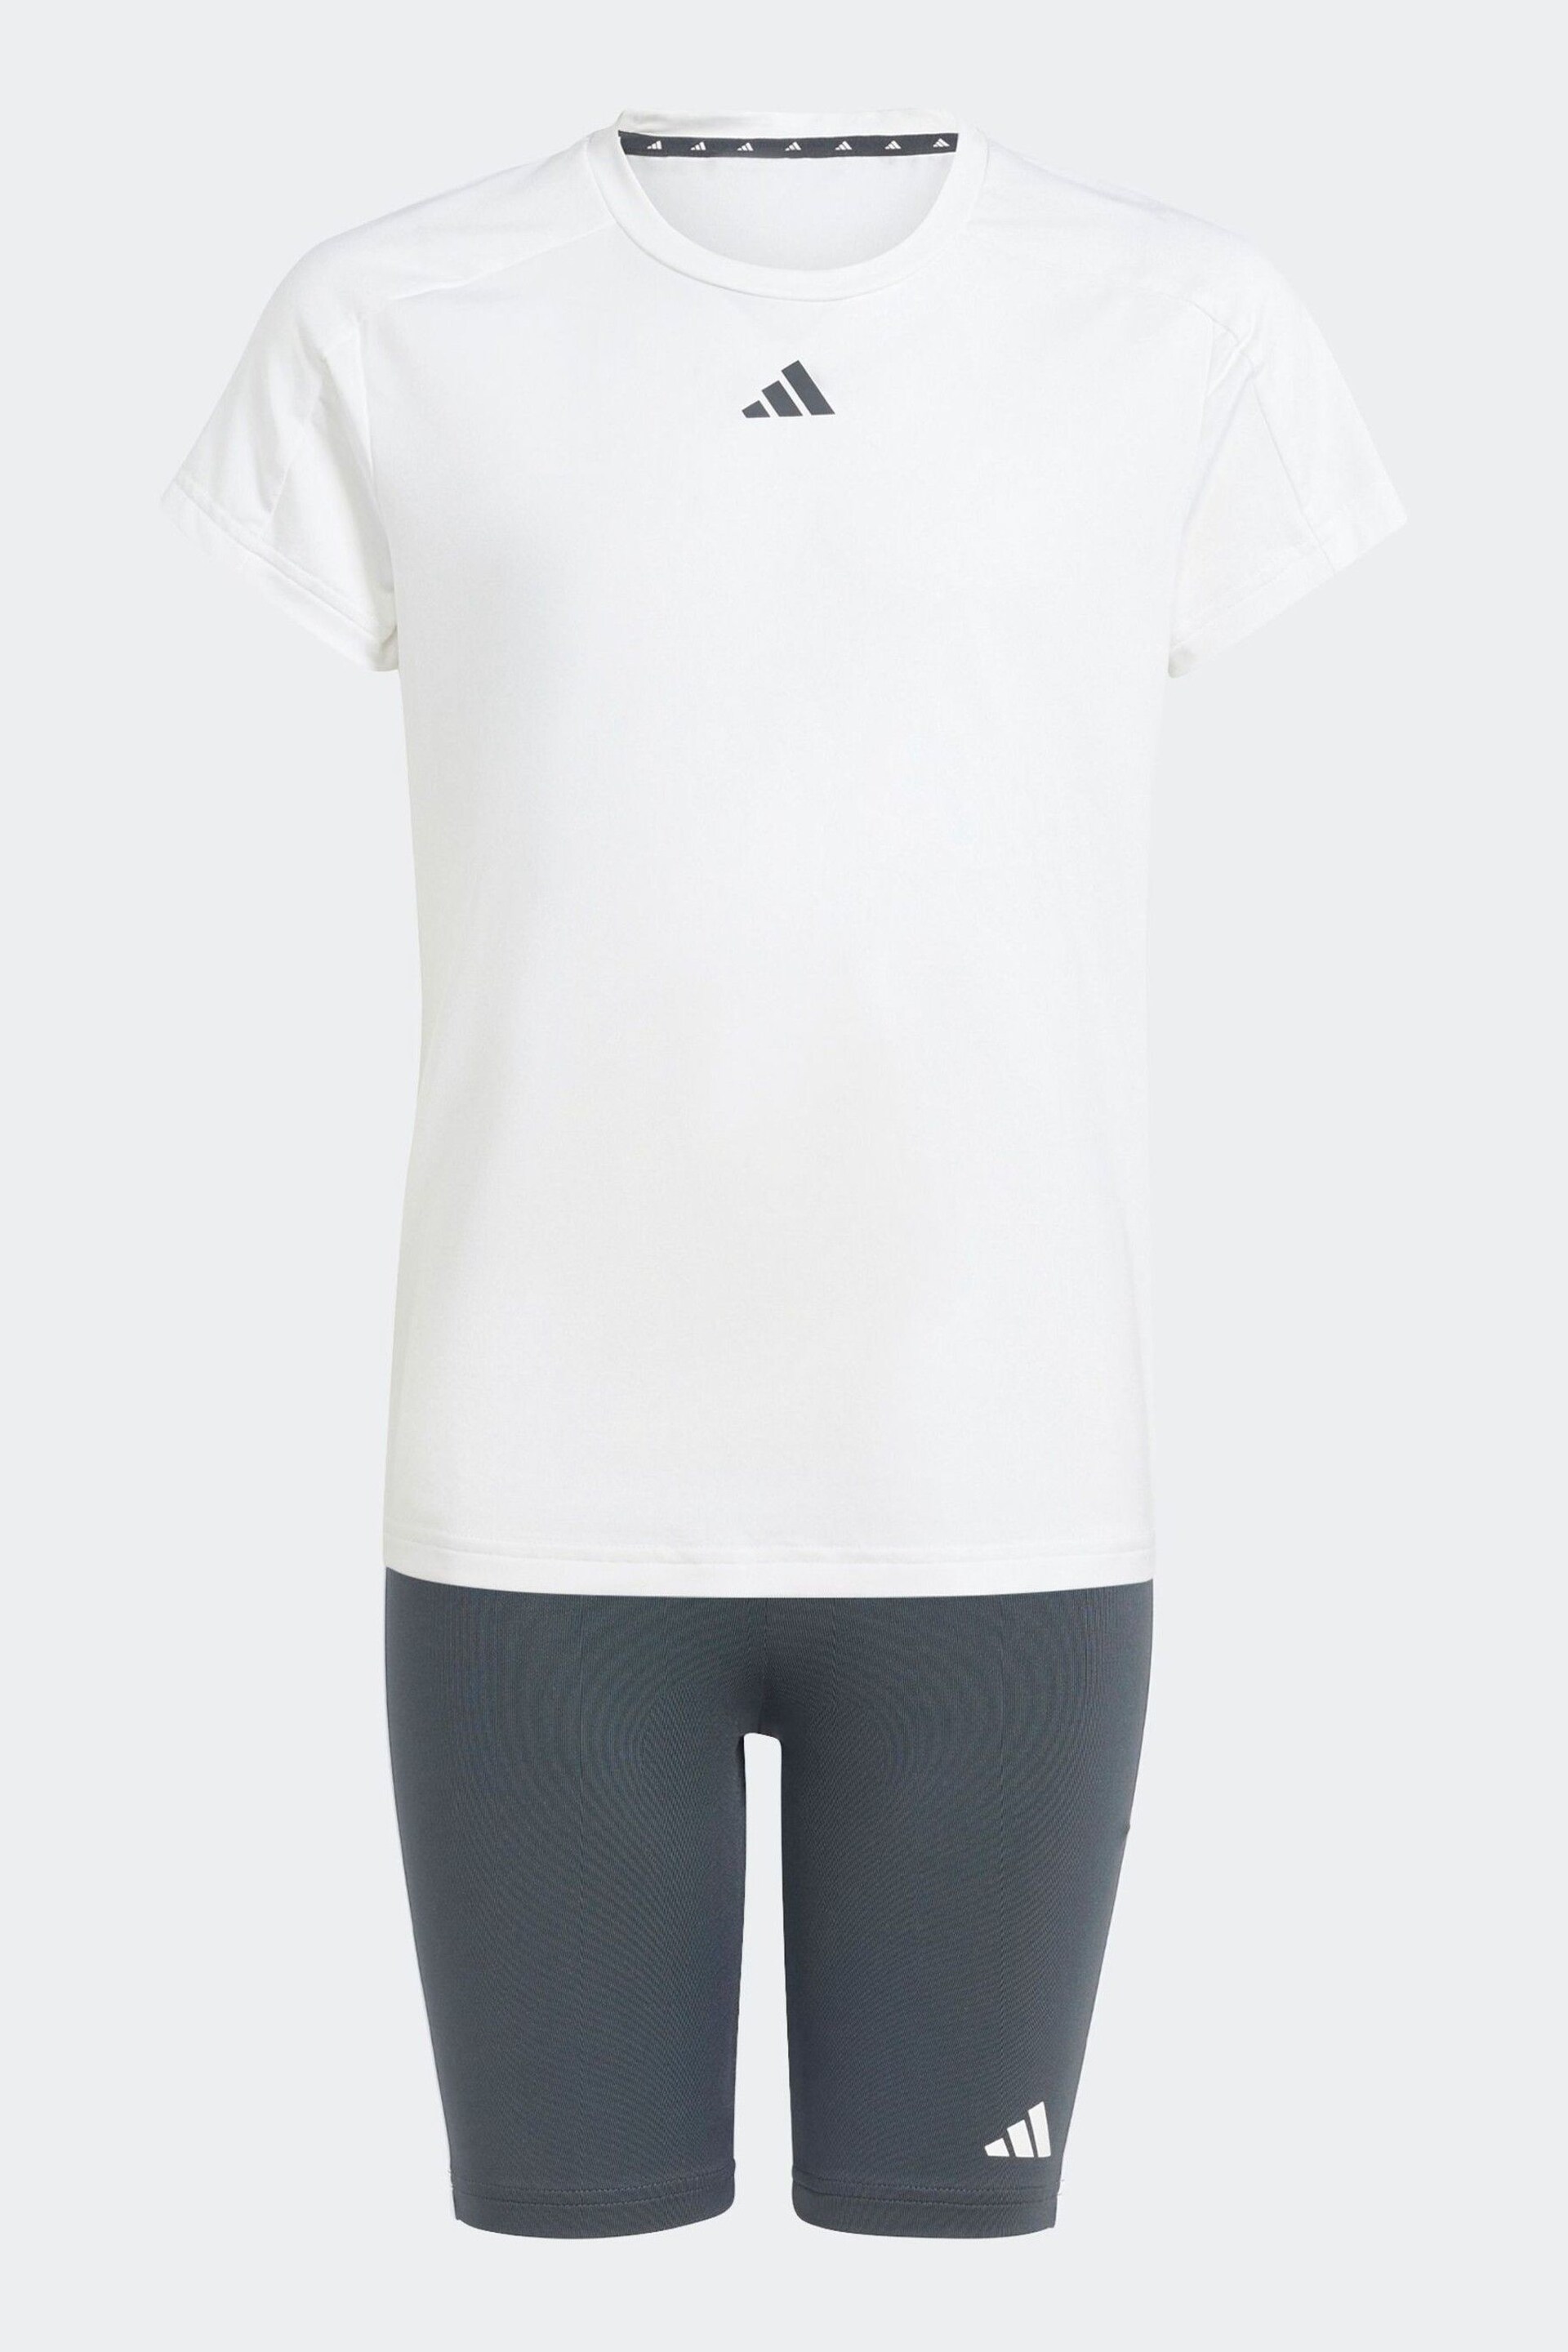 adidas White Kids Train Essentials T-Shirt and Shorts Set - Image 7 of 13